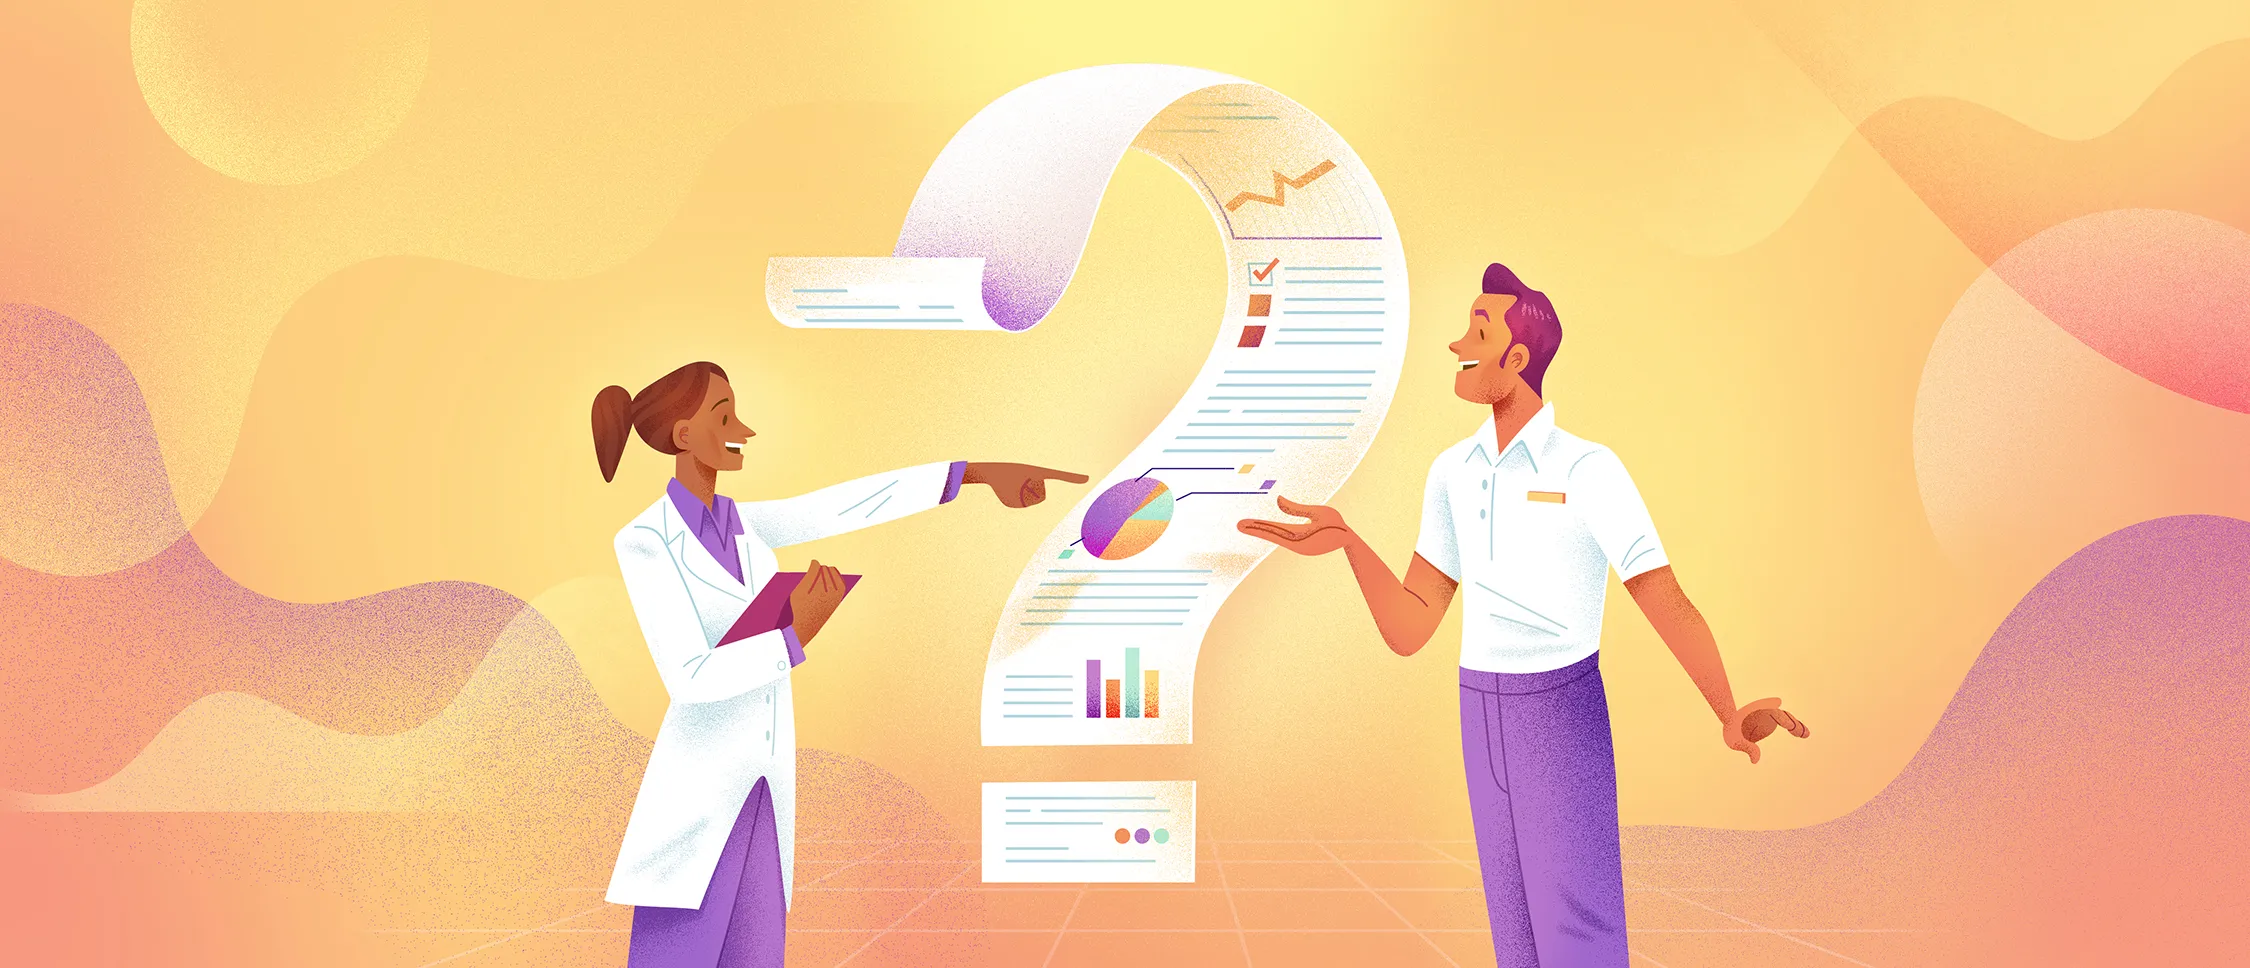 Woman in white lab coat talking with a man and pointing to a question mark made of paper with graphics